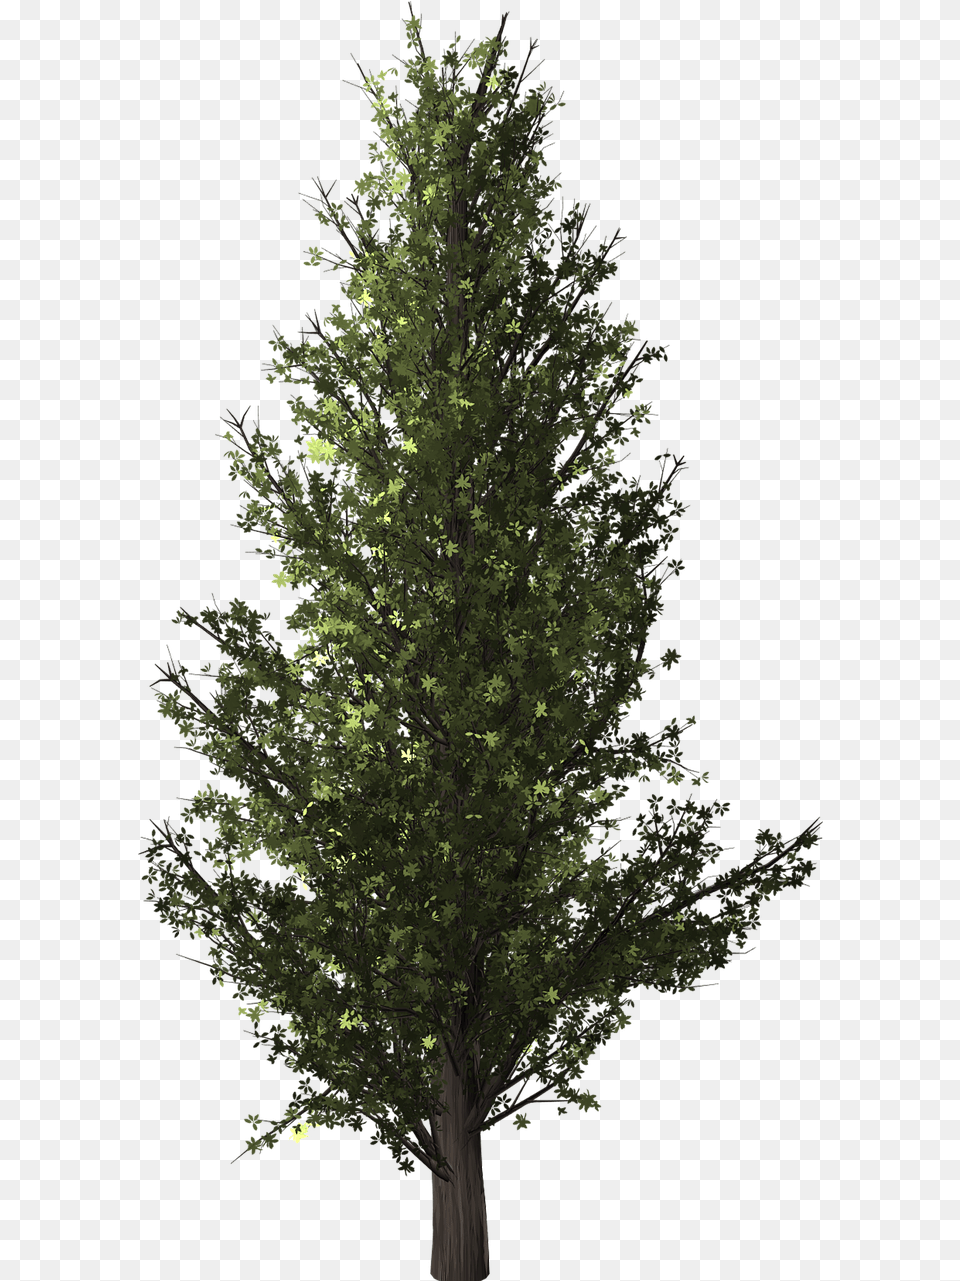 Tree Clip Art Forest Plants Image Forest Tree Background, Conifer, Fir, Plant, Pine Free Transparent Png